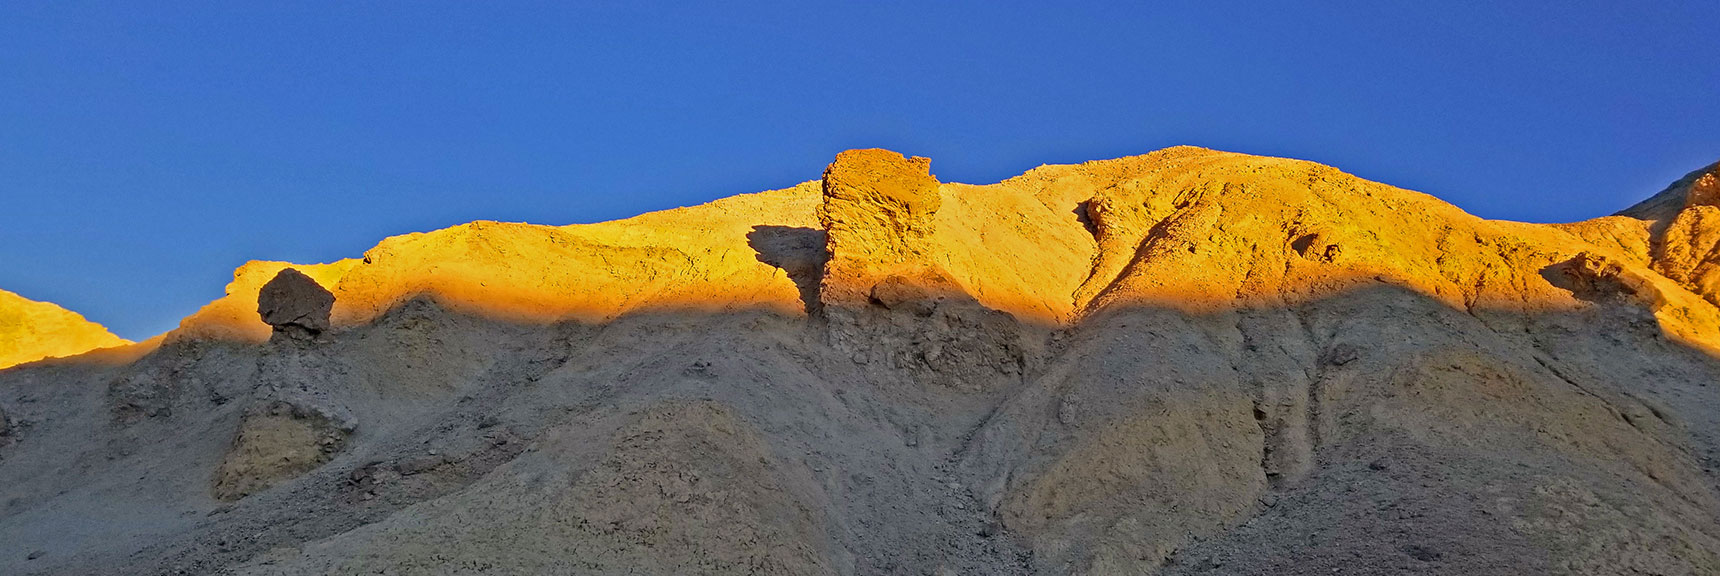 Artistic Shapes Begin to Emerge in the Sunrise | Twenty Mule Team Canyon | Death Valley National Park, California